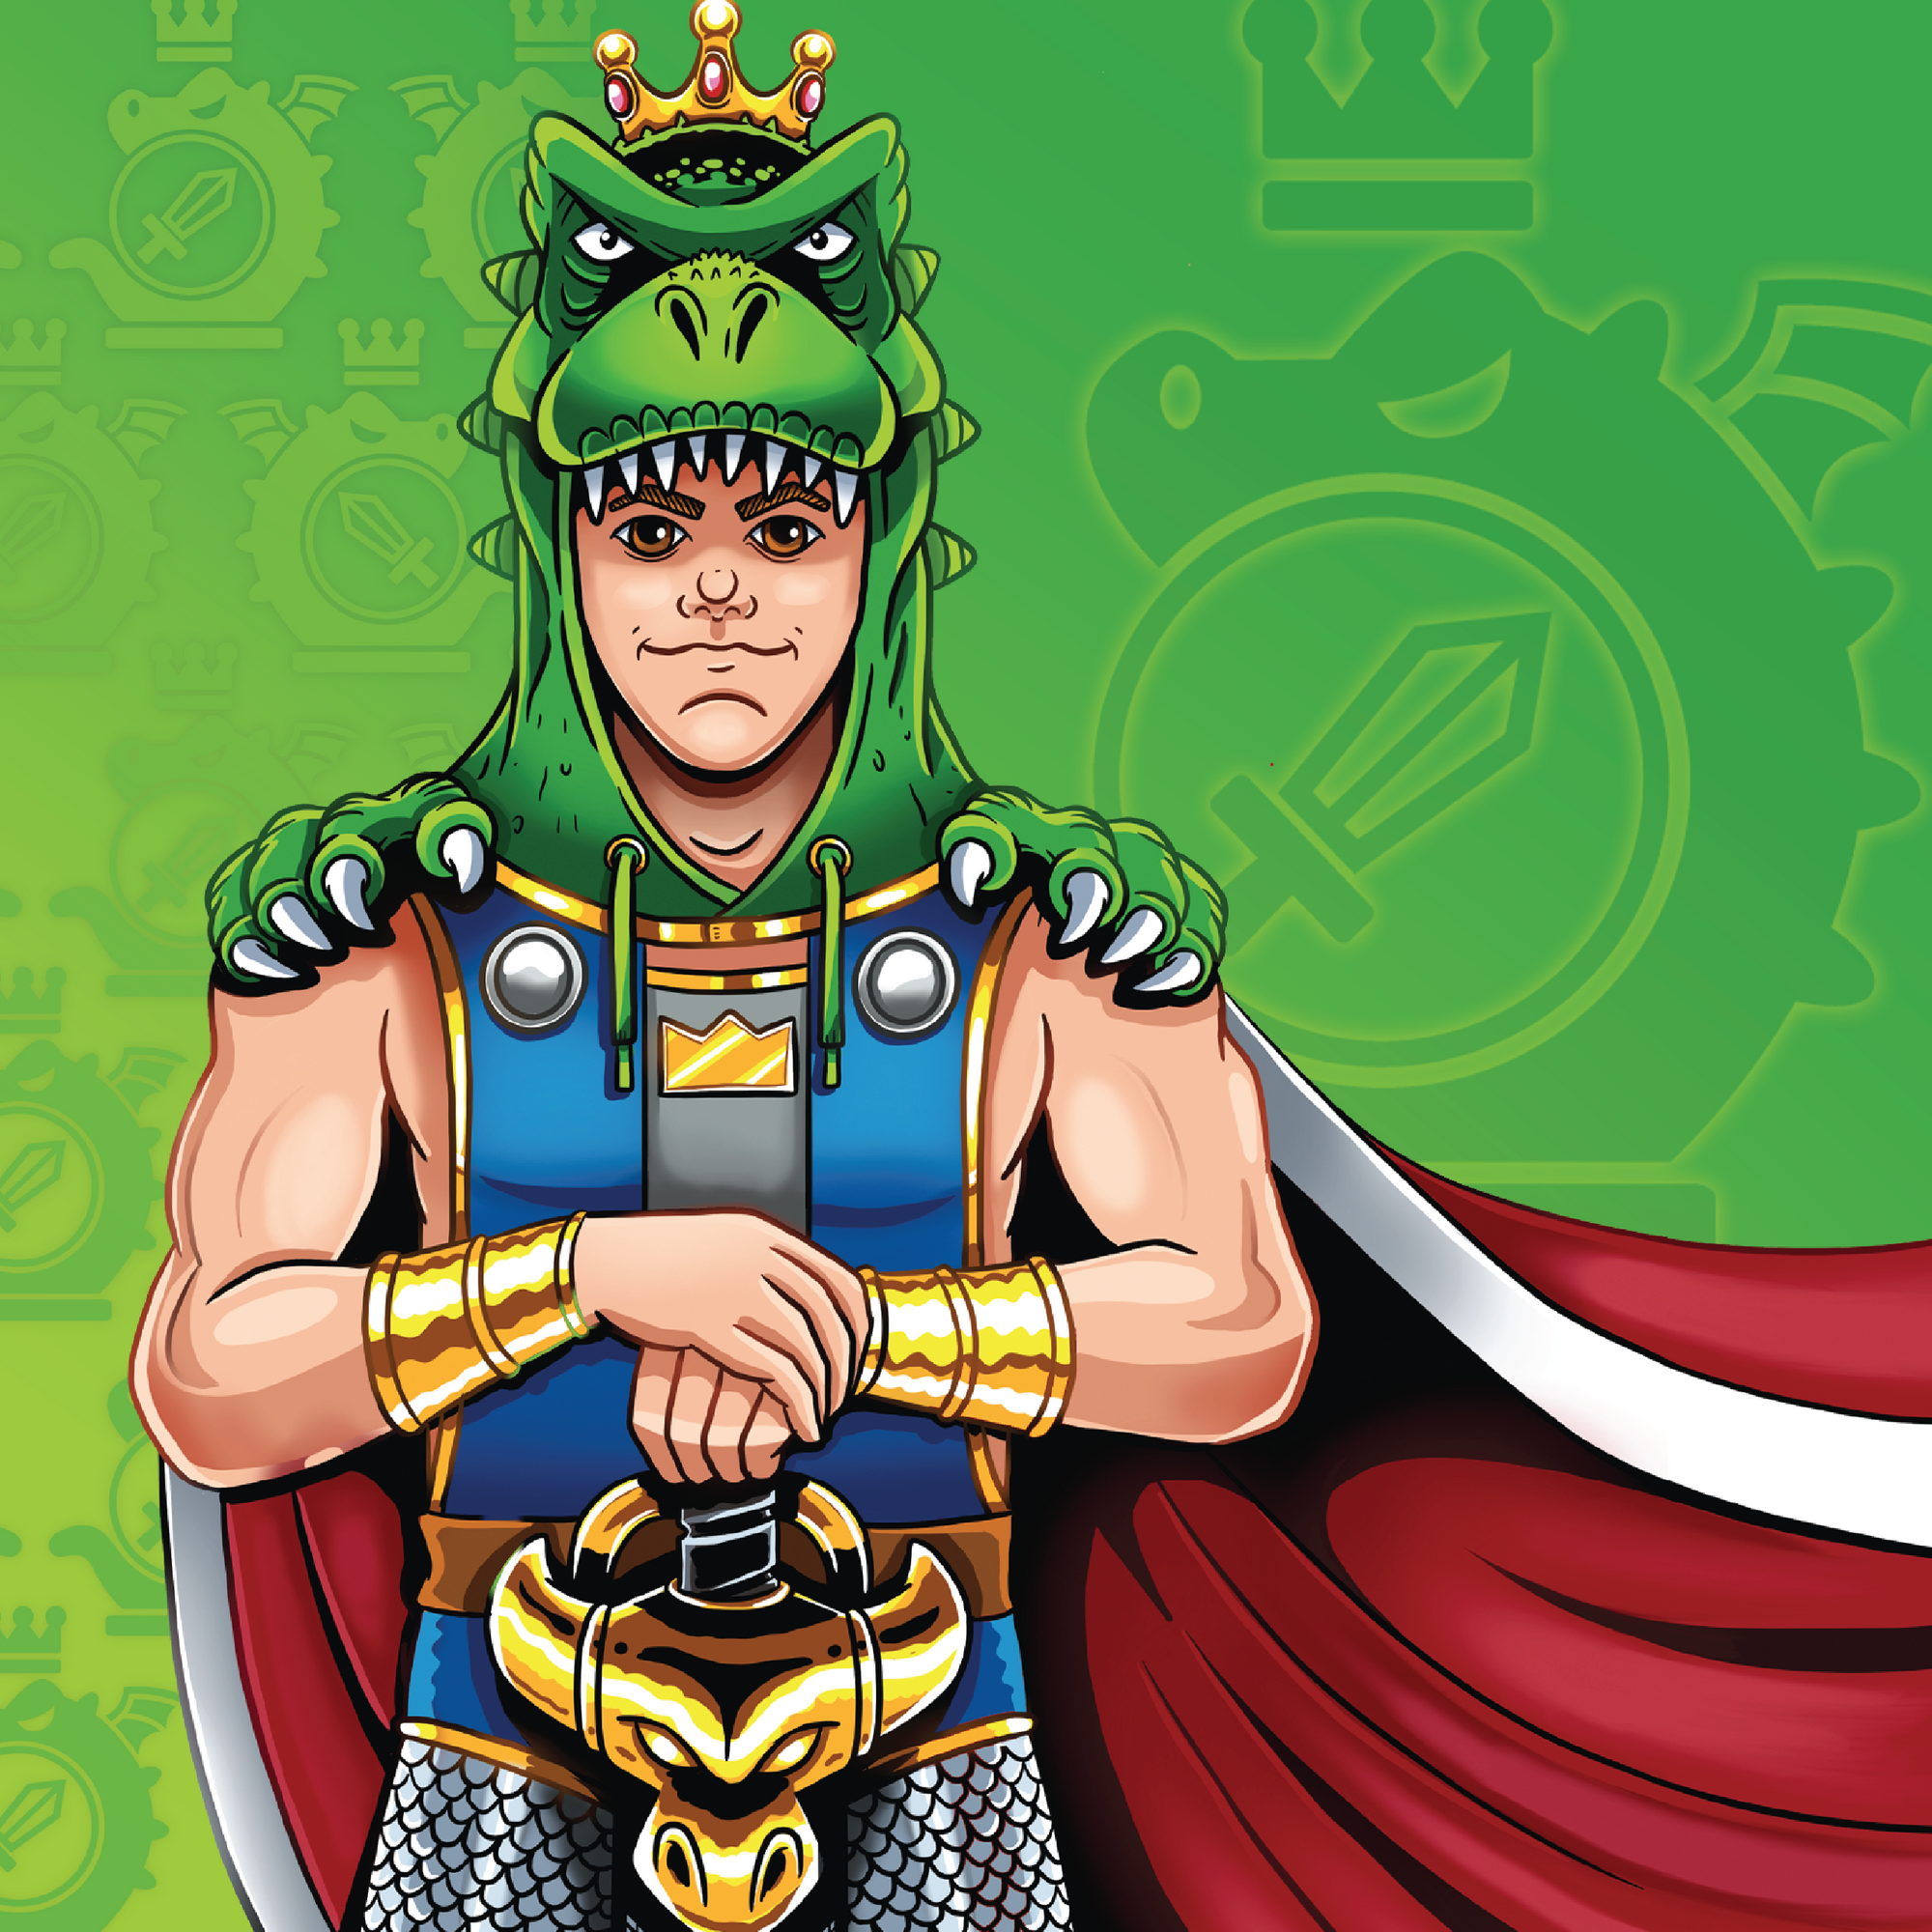 Comic style drawing of legendary King of Camelot, Arthur Pendragon, with a crown and a dragon hat and cloak of emerald green.